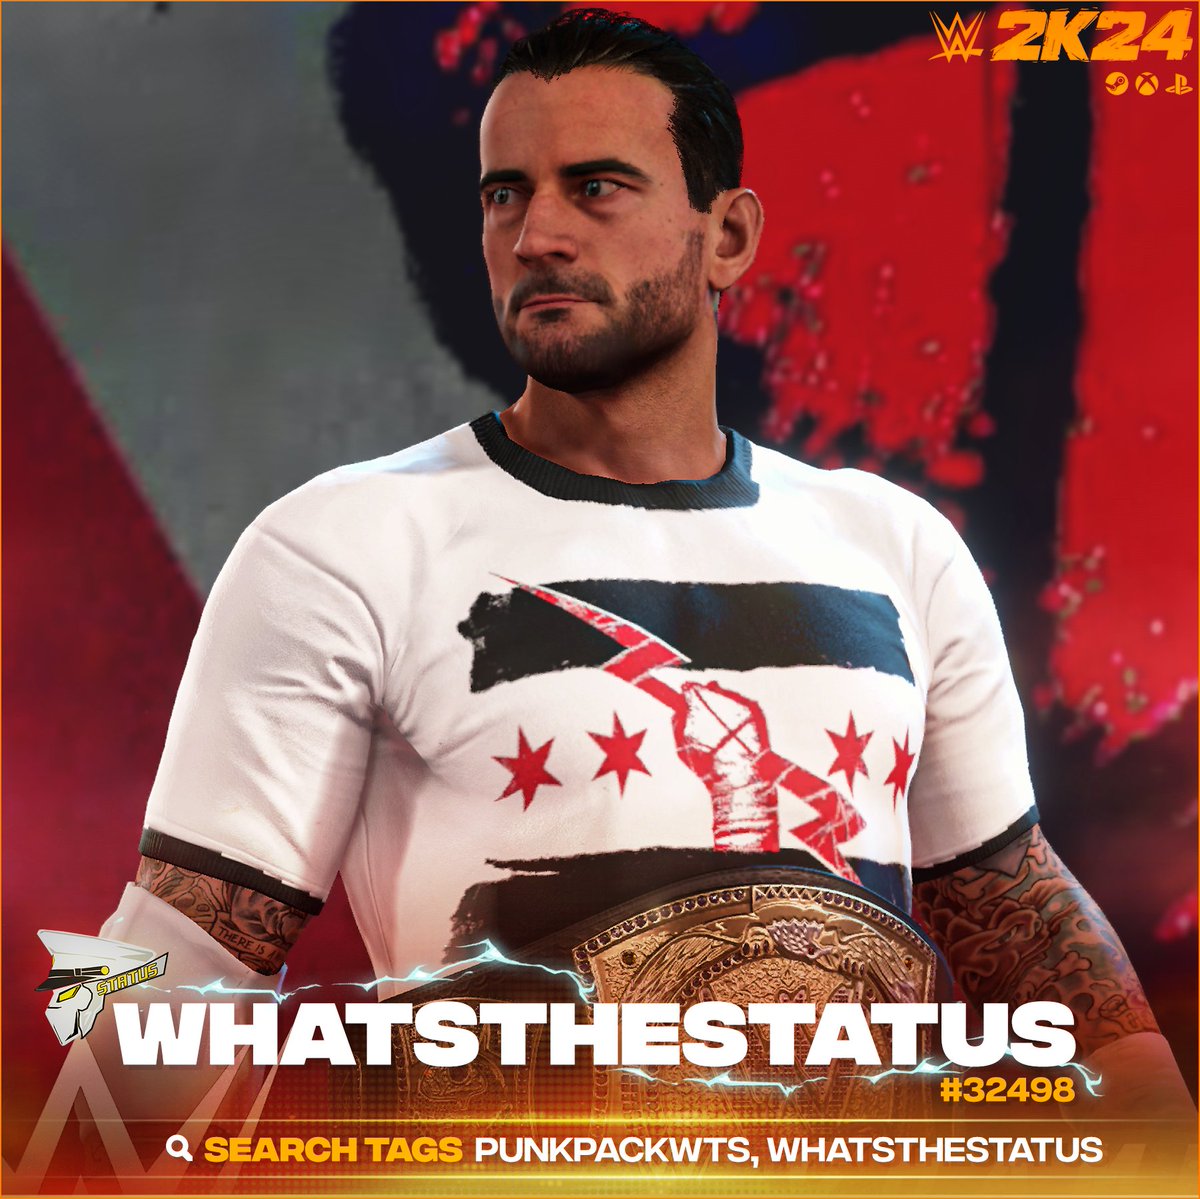 NEW! #WWE2K24 Upload To Community Creations!

★ CM Punk '11 (InGame Edit)

★ Search Tag → PUNKPACKWTS or WhatsTheStatus
★ Collaboration →@Kamillion2k
★ Support Me → linktr.ee/WhatsTheStatus

★ INCLUDES
● Custom Portrait
● New Hair
● Fixed Tattoos
● DeAged face
●…